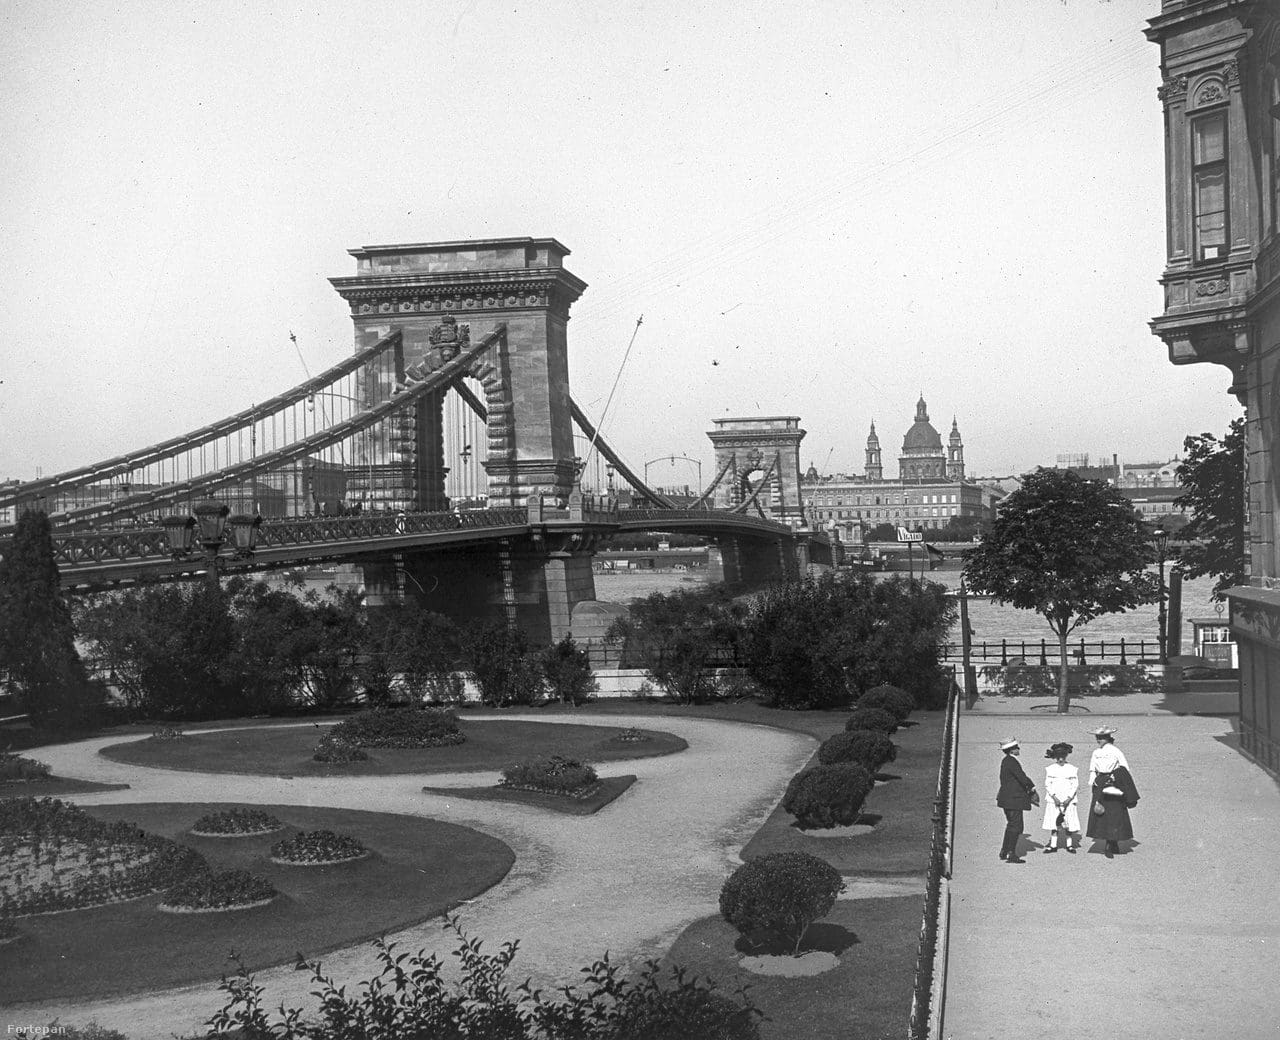 How Did the Bridges of Budapest Get Their Name?